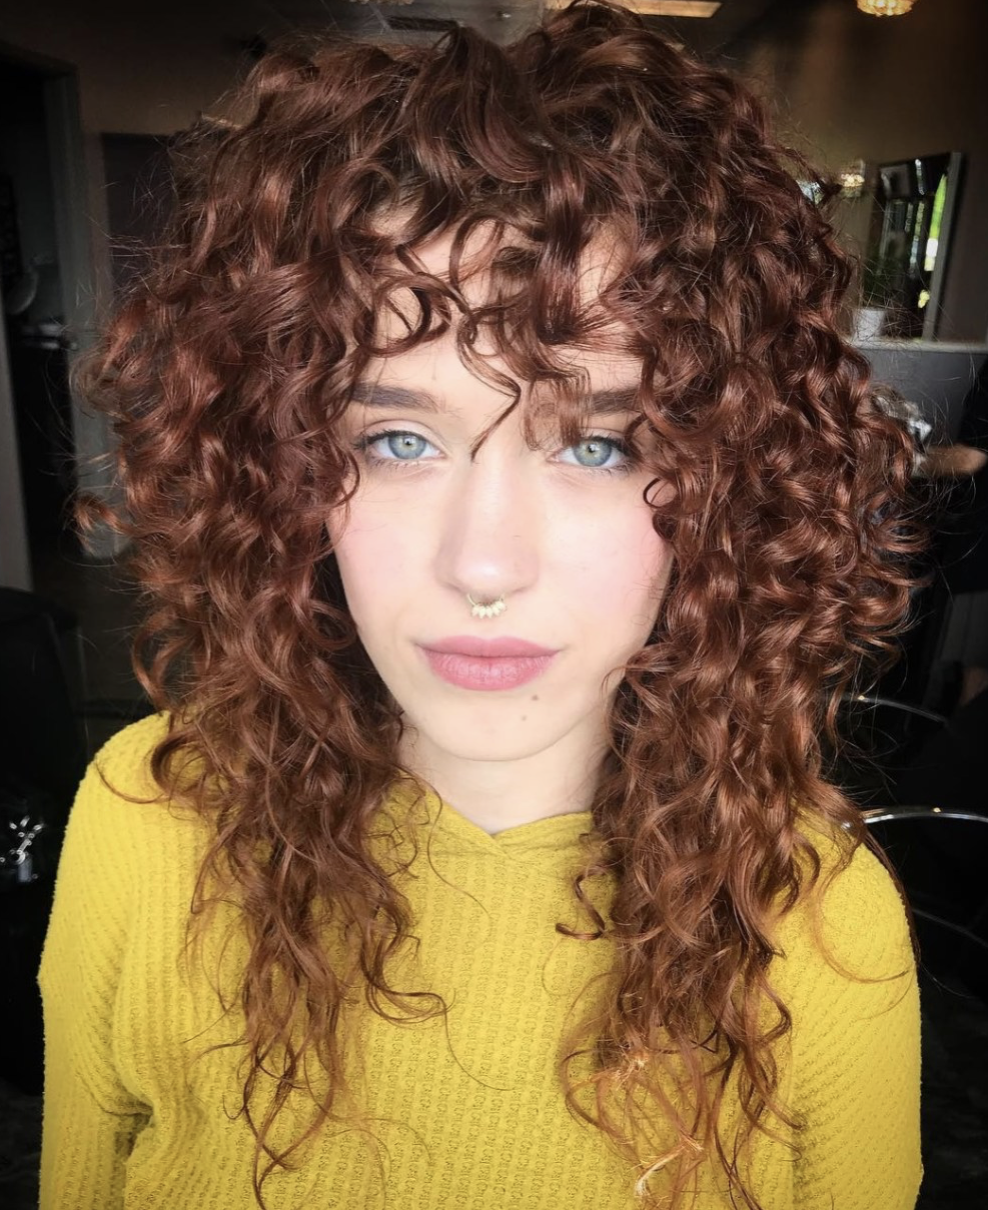 HOW TO GET NATURAL CURLY HAIRSTYLES - LatestHairstylePedia.com